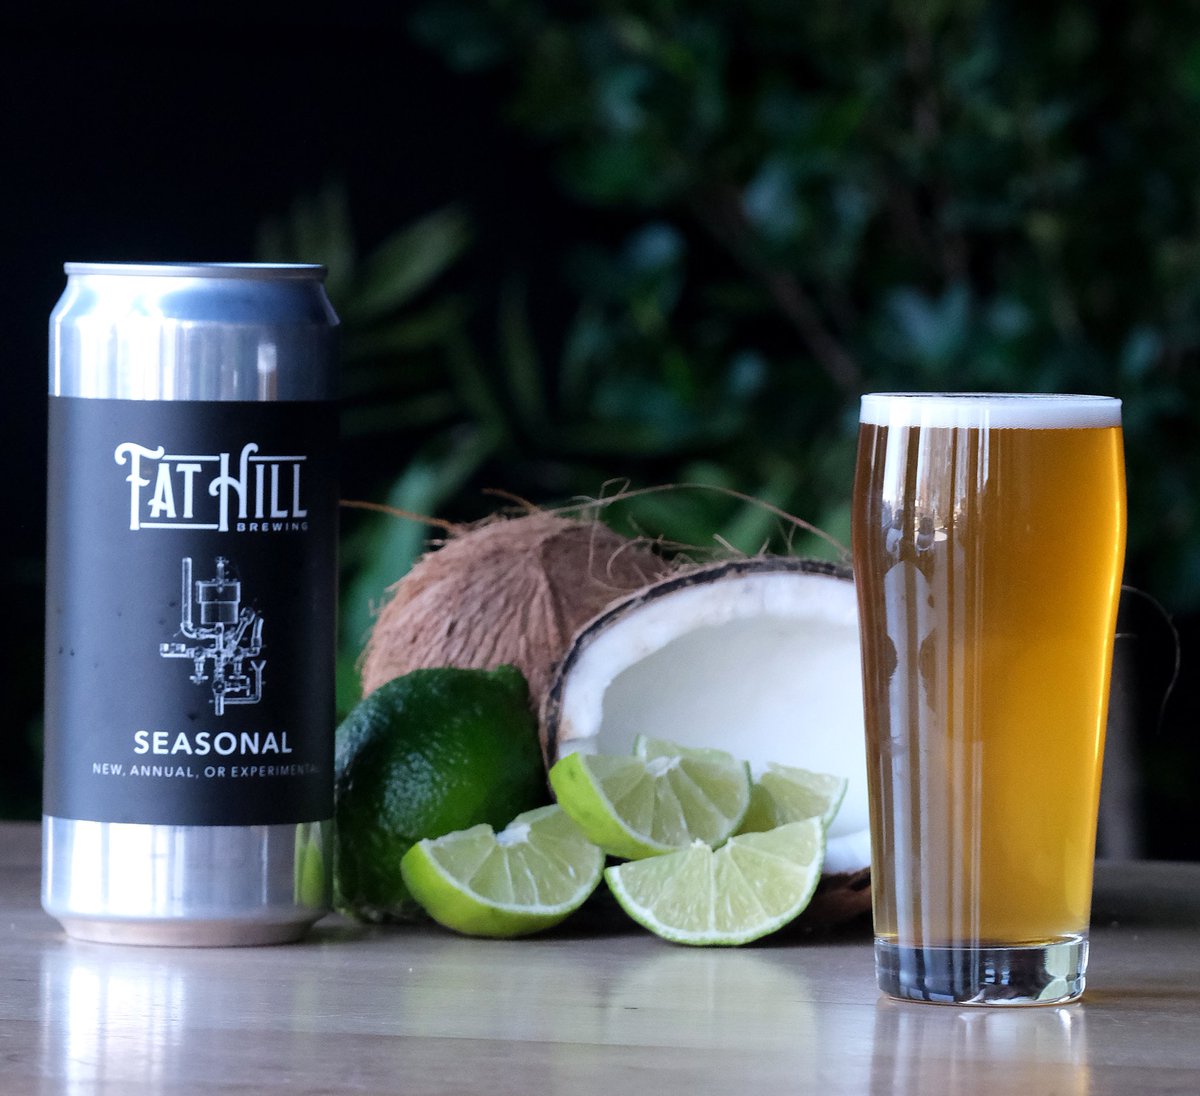 New on tap today is the Coconut Lime Sour! Big, jaunty, and punctual flavors line up just right to magically transform 16oz of liquid into a few minutes of tropical paradise. (4.0 % abv - 18 ibu)